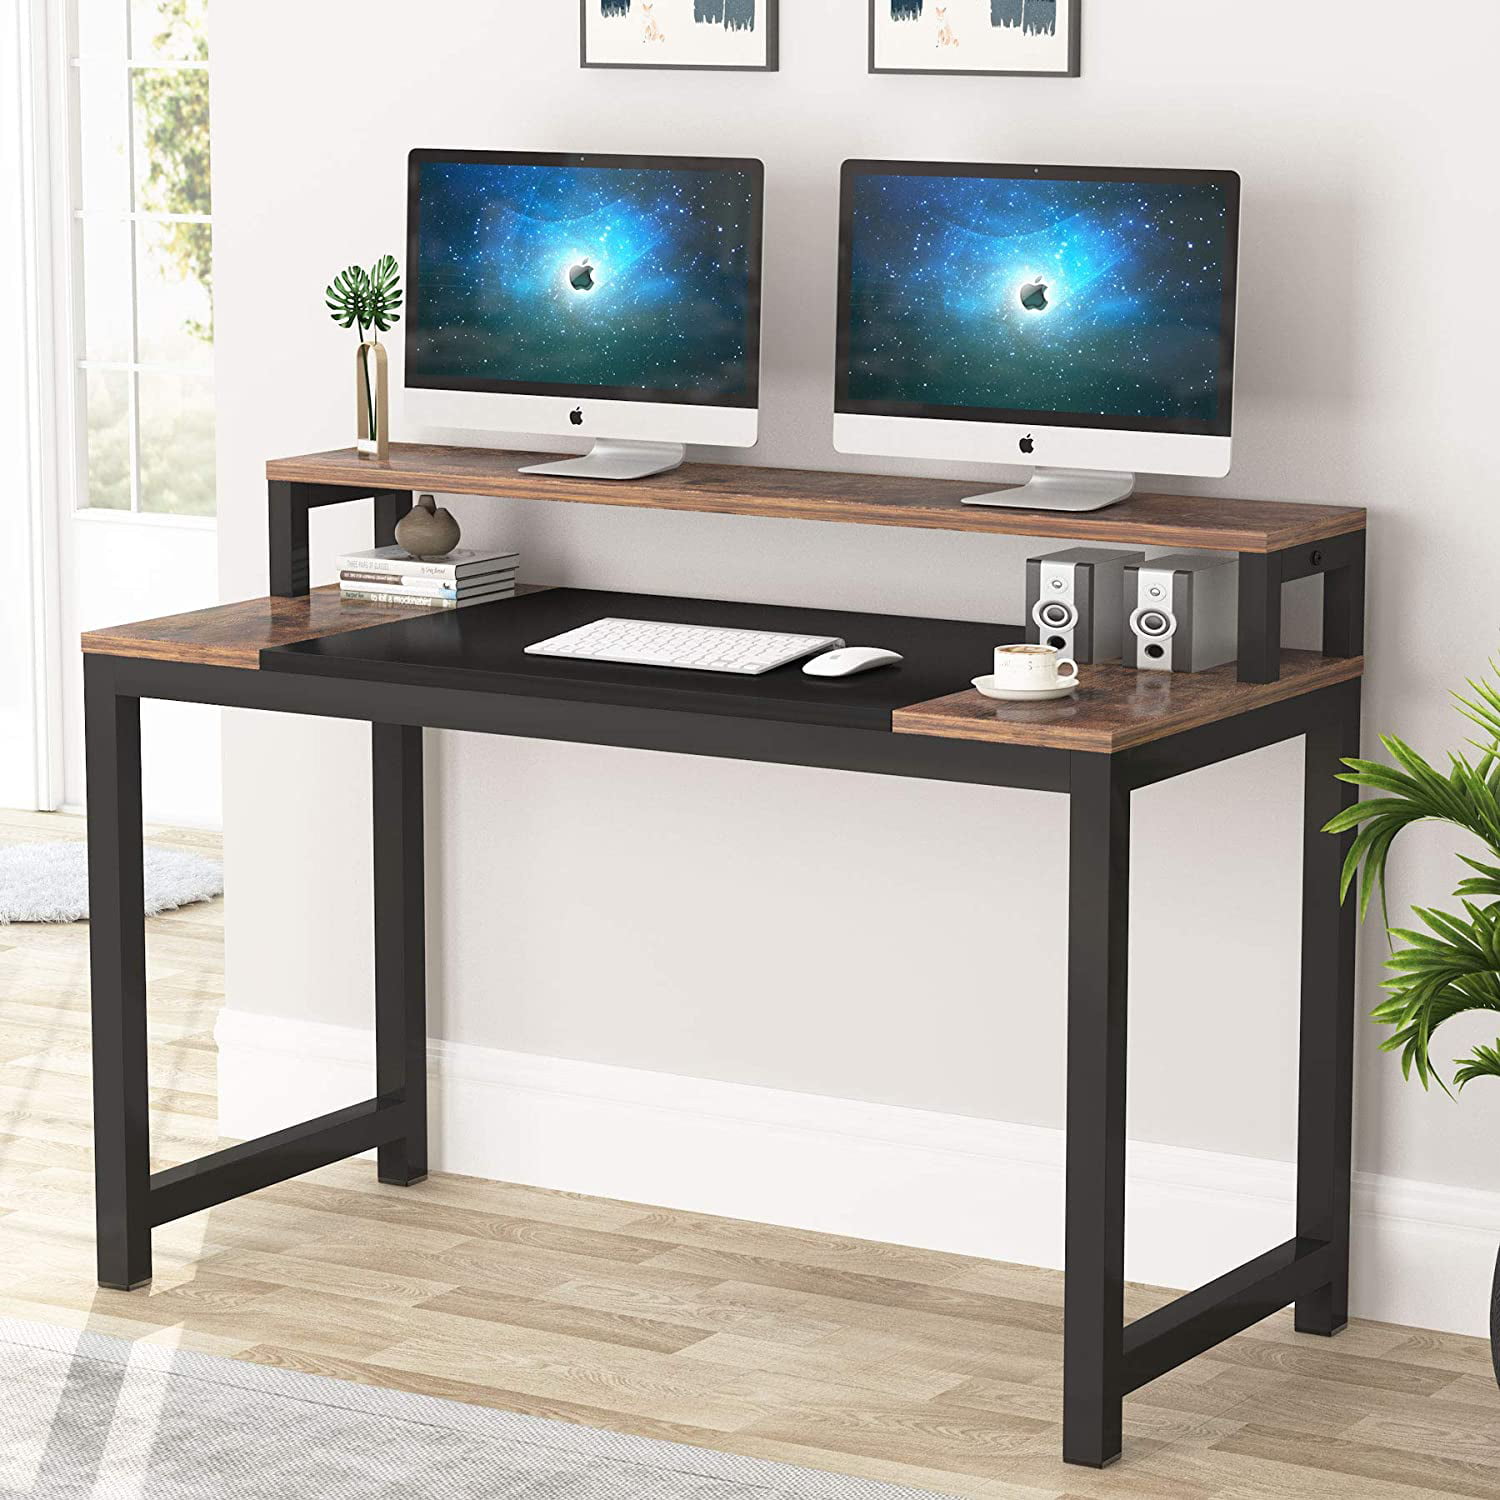 Wood Computer Desk PC Laptop Table Workstation Study Writing Home Office w Shelf 